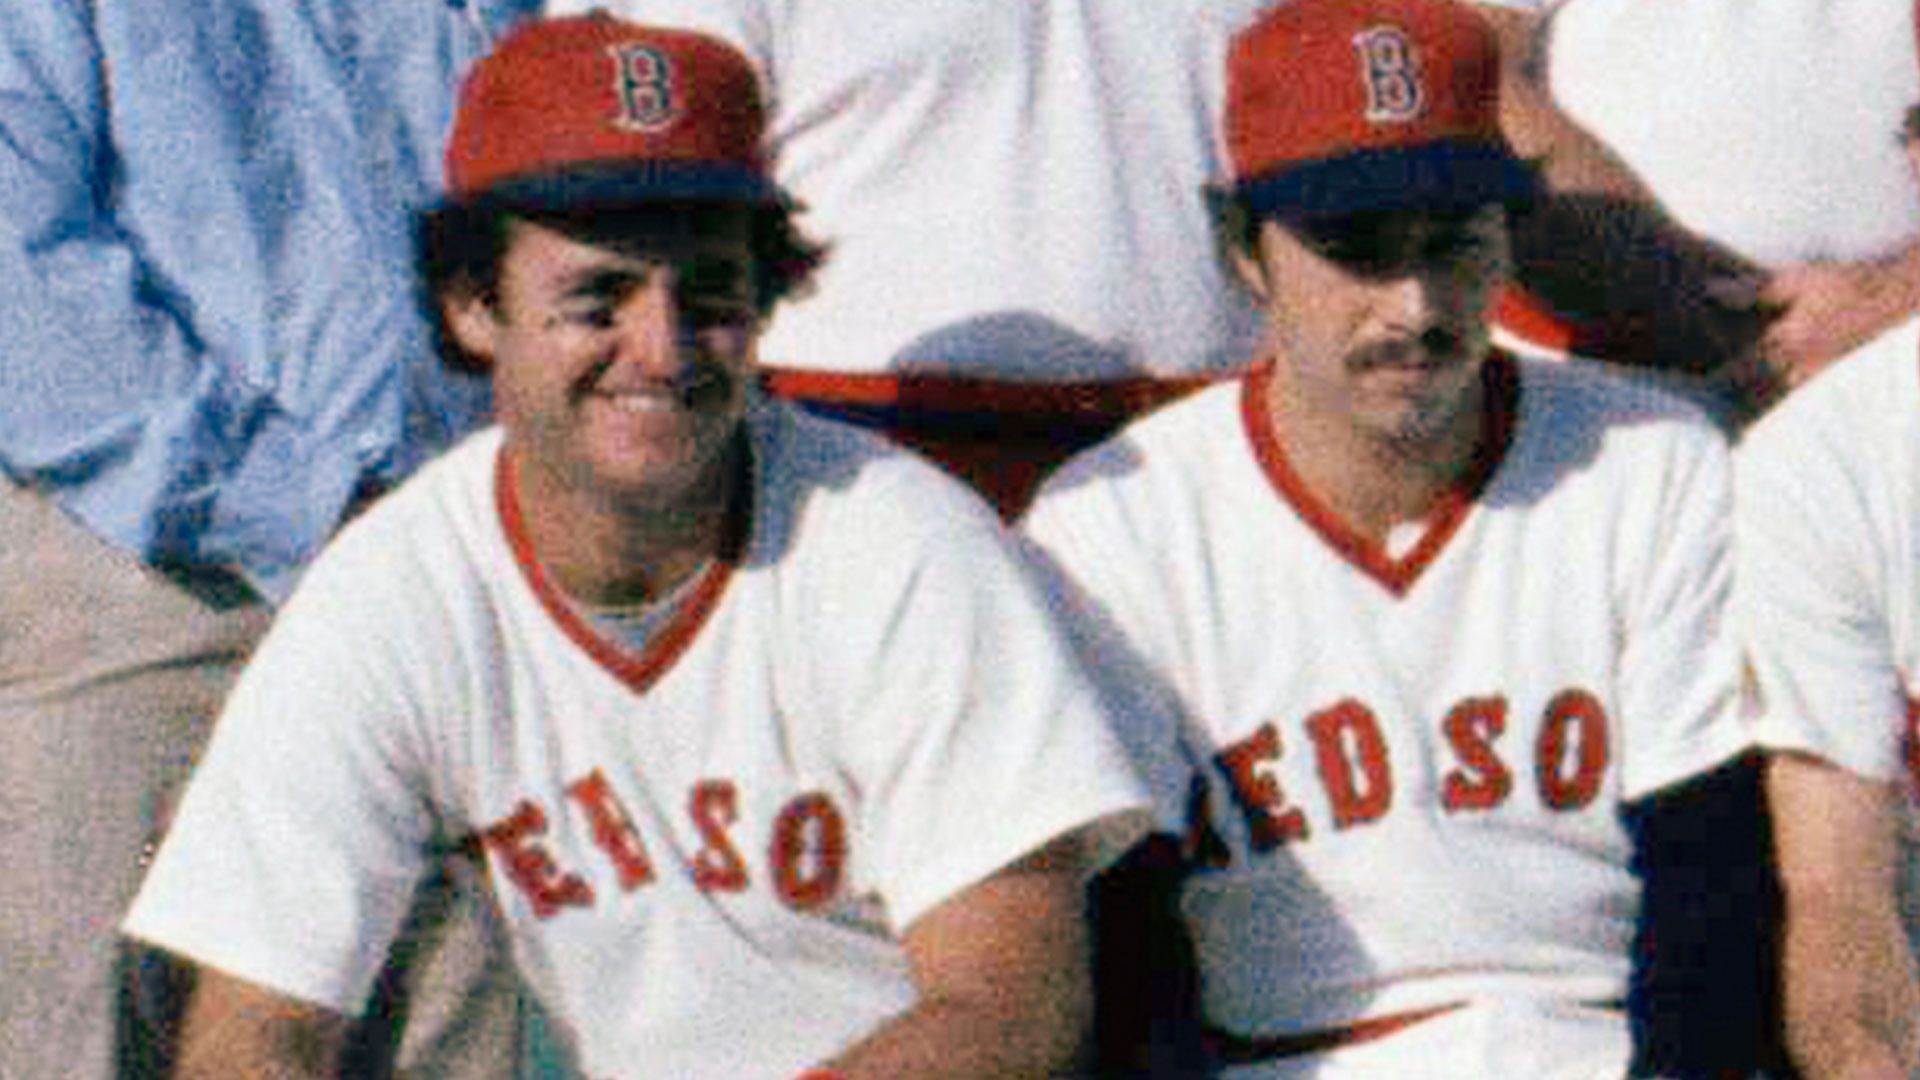 Jerry Remy's former Red Sox teammates, broadcast colleagues pay tribute